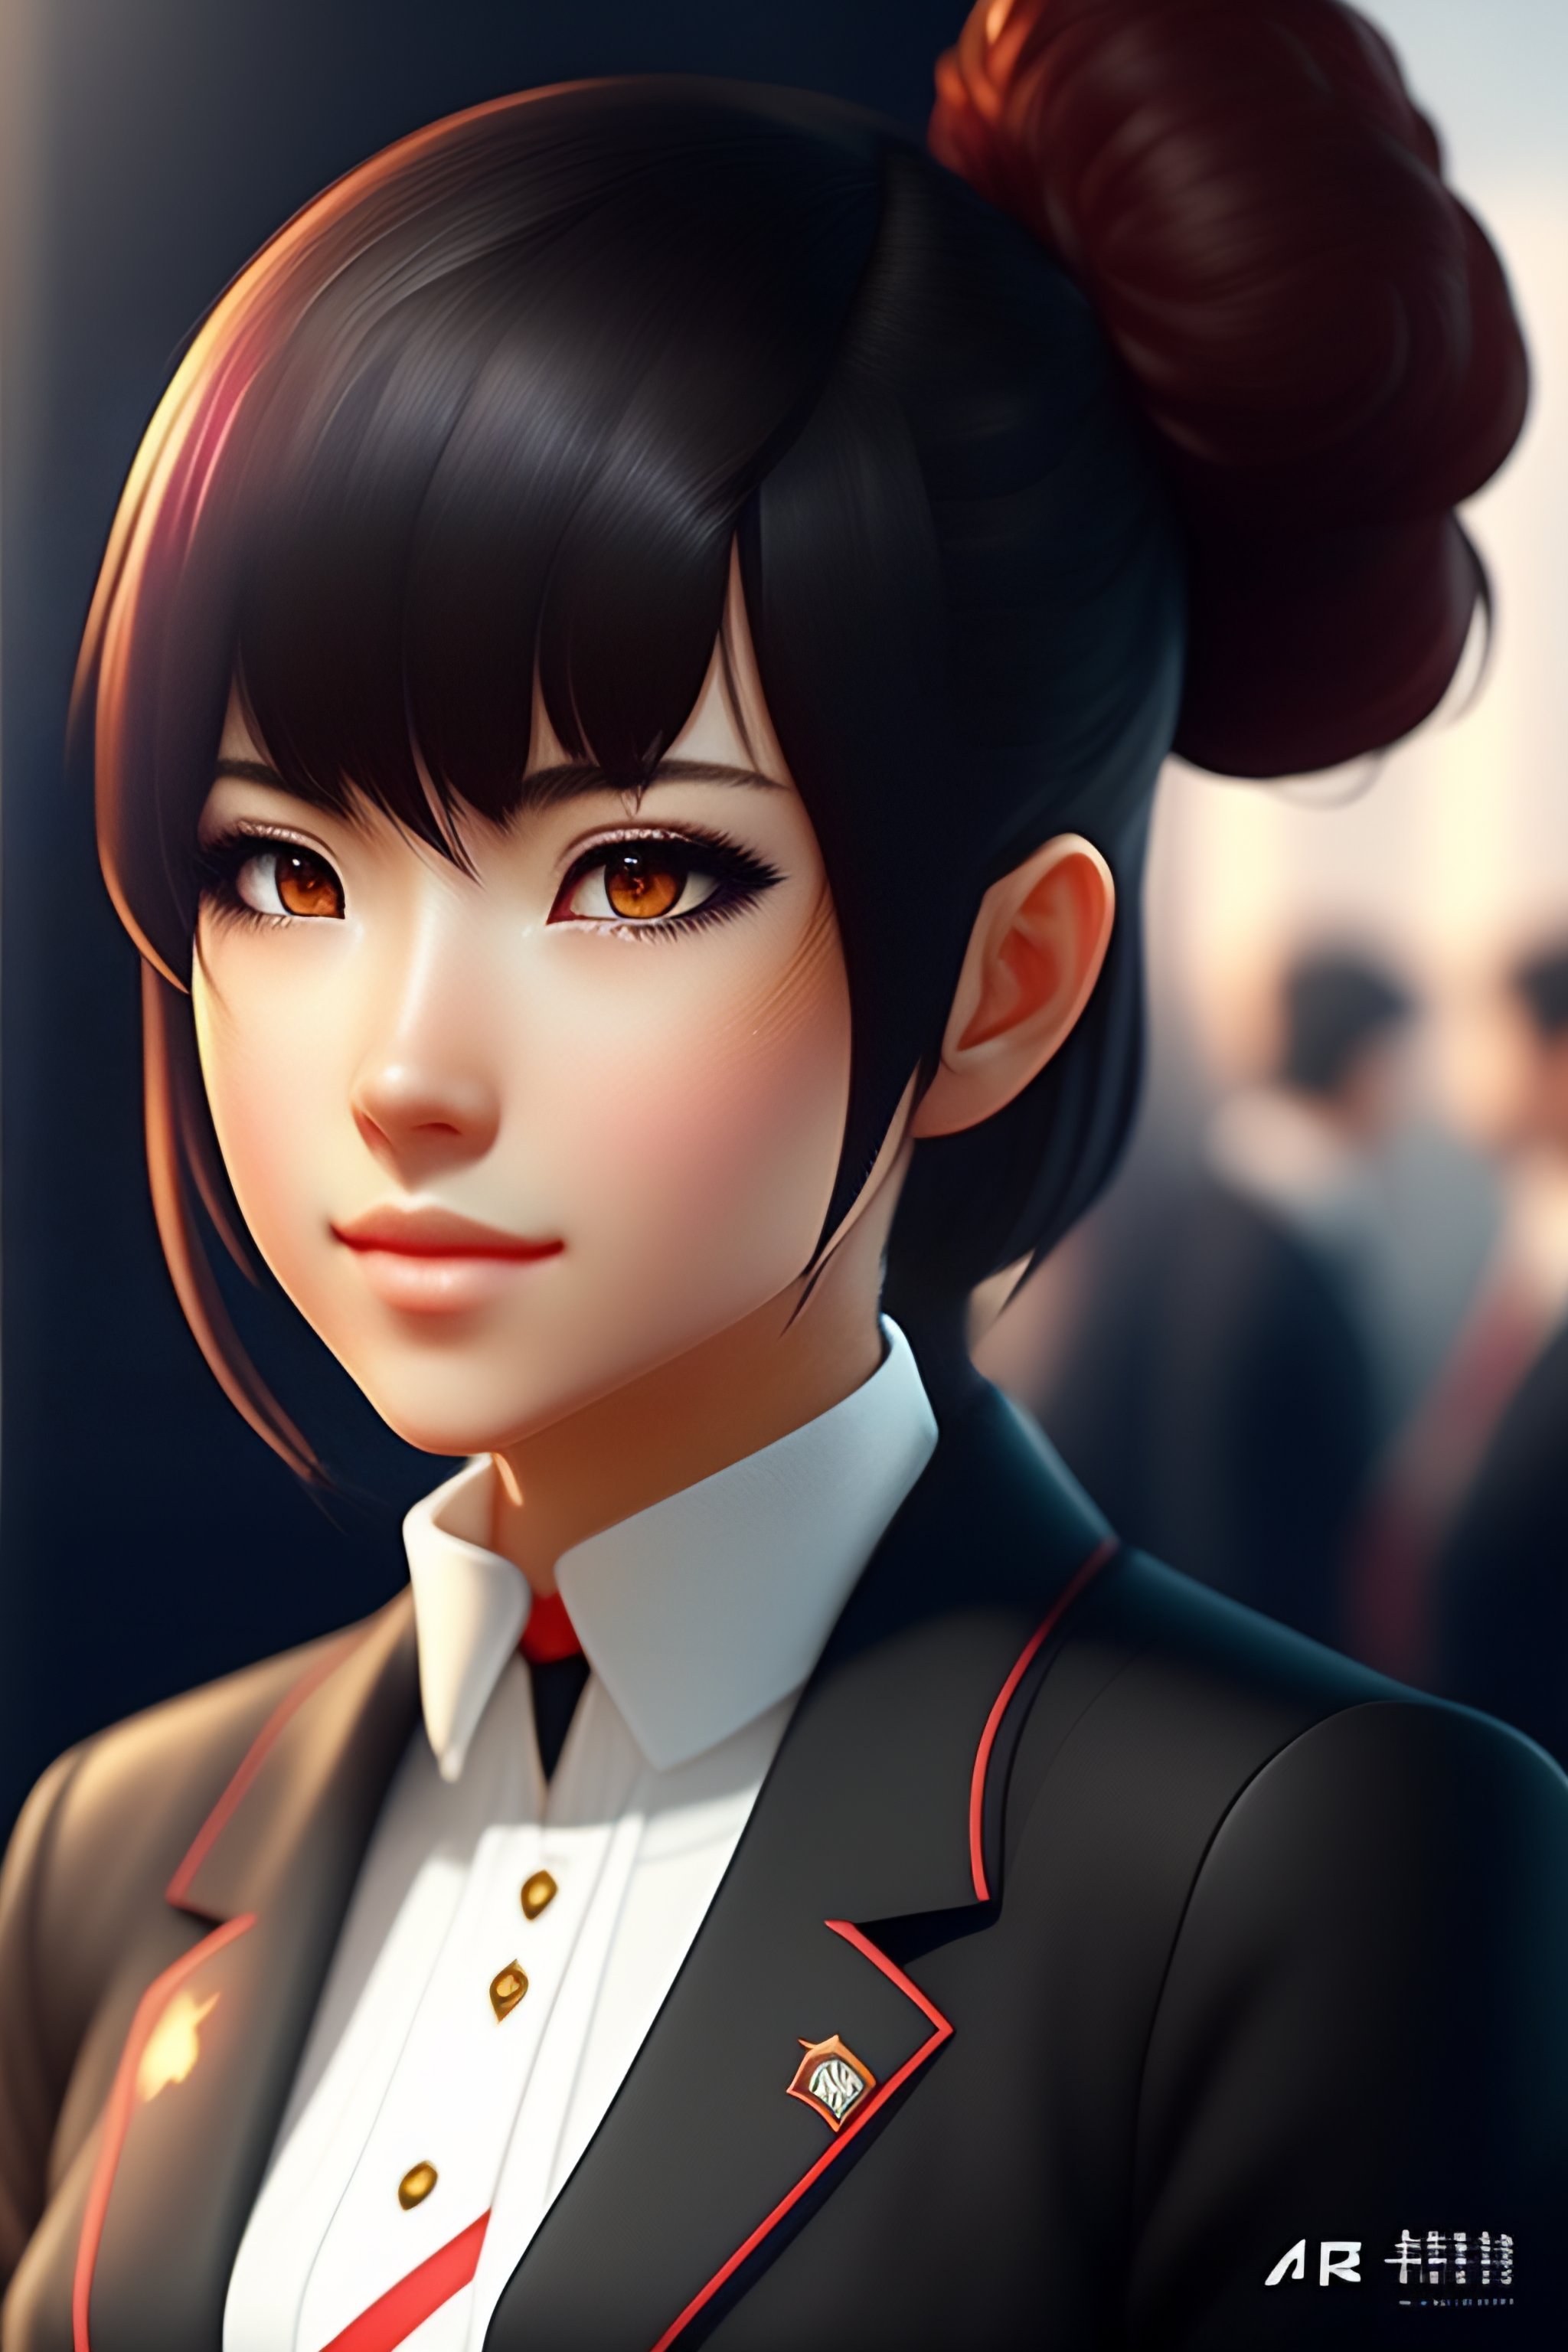 Lexica - Create a realistic anime-style portrait of a young